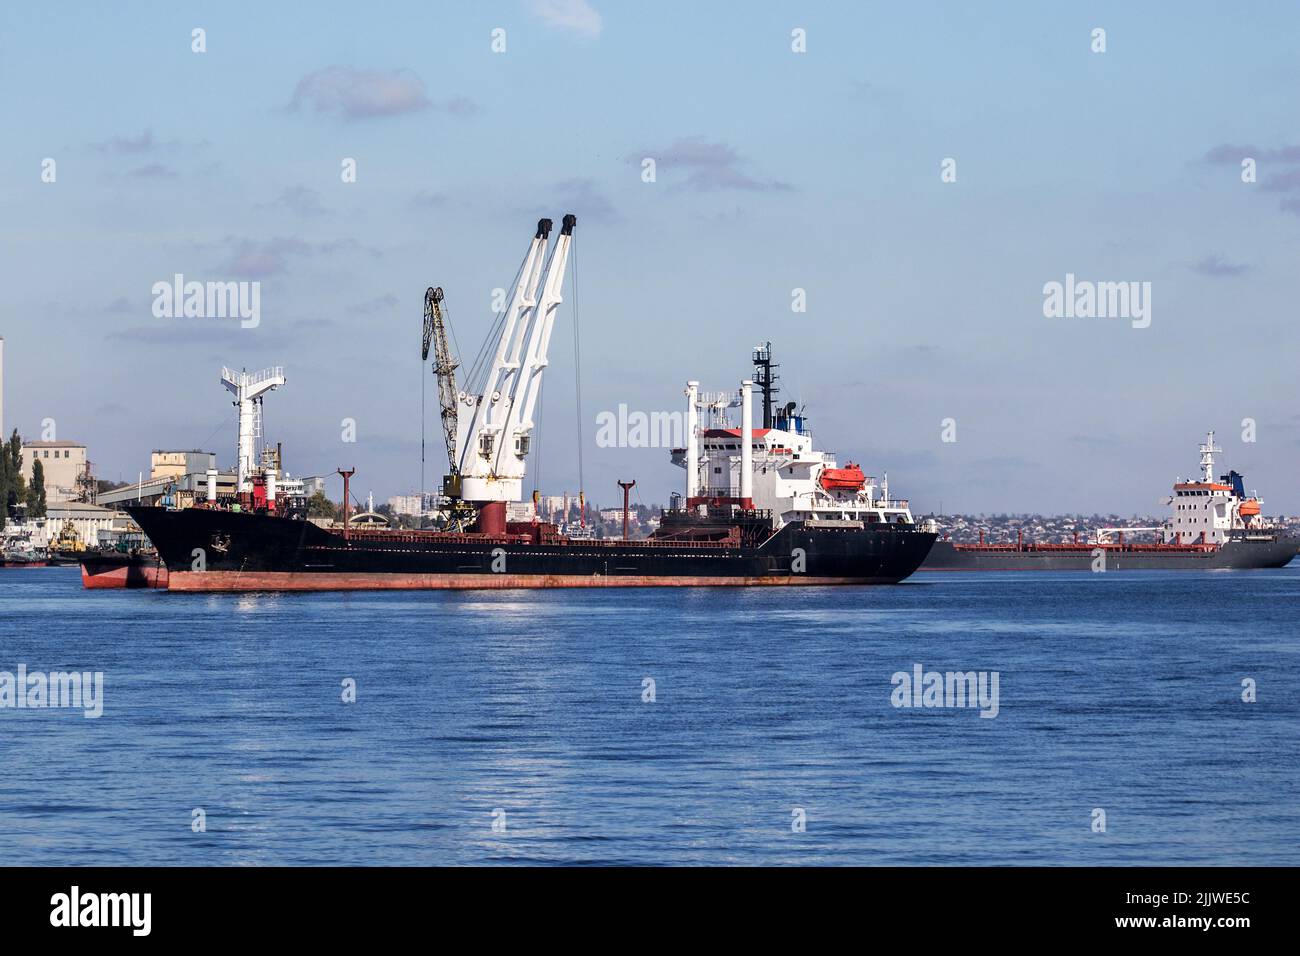 image of a large dry cargo ship on the roadstead of the Dnieper river Stock Photo